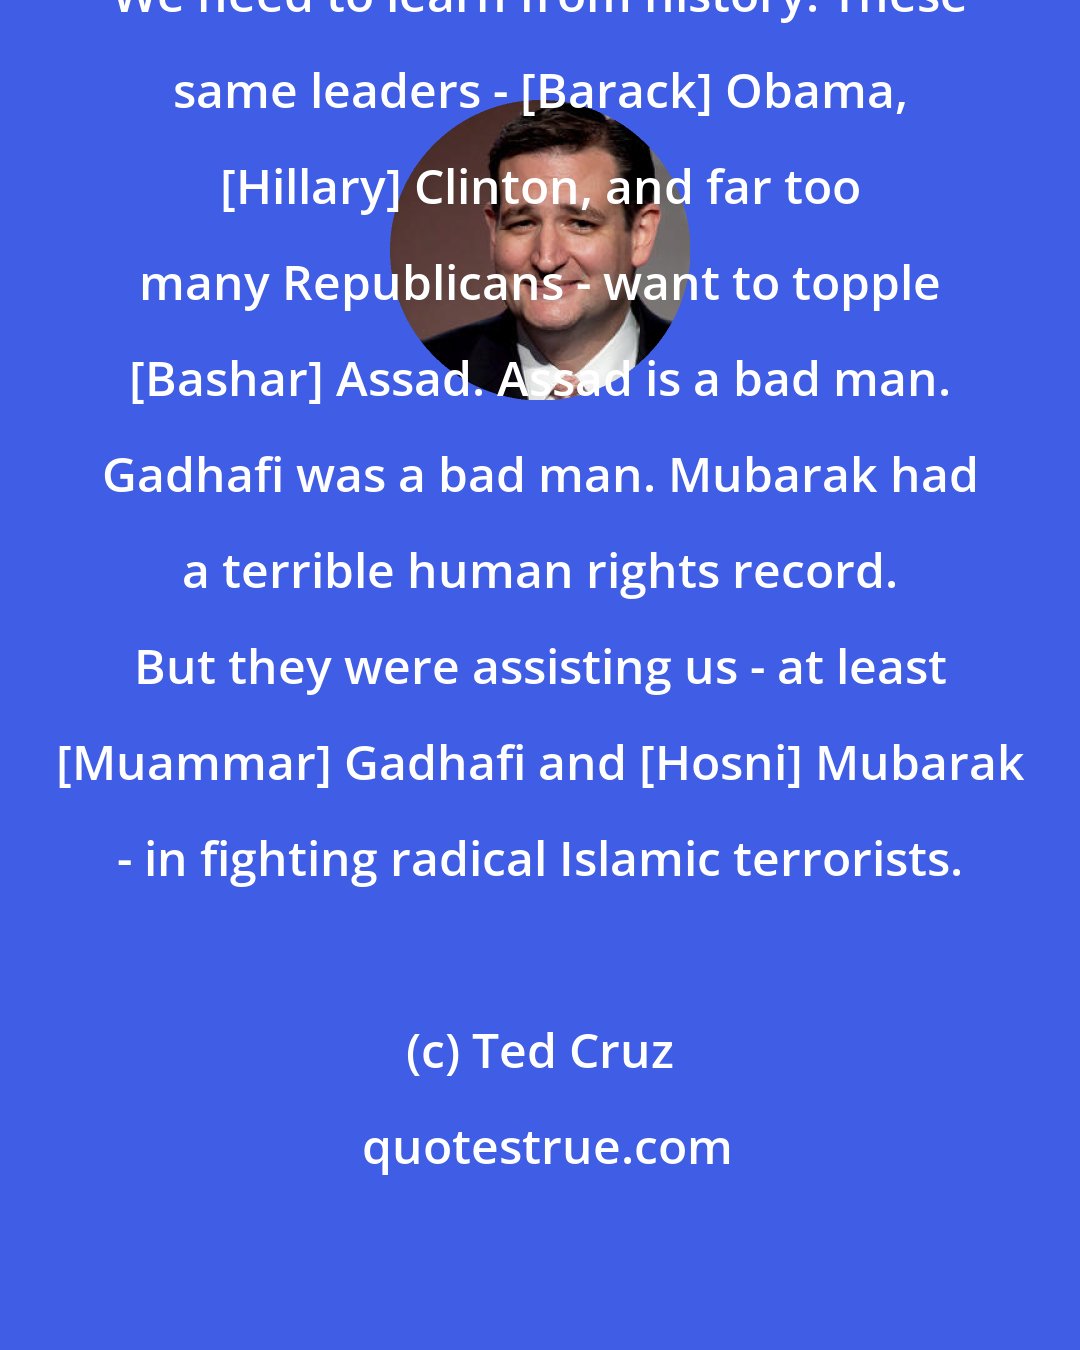 Ted Cruz: We need to learn from history. These same leaders - [Barack] Obama, [Hillary] Clinton, and far too many Republicans - want to topple [Bashar] Assad. Assad is a bad man. Gadhafi was a bad man. Mubarak had a terrible human rights record. But they were assisting us - at least [Muammar] Gadhafi and [Hosni] Mubarak - in fighting radical Islamic terrorists.